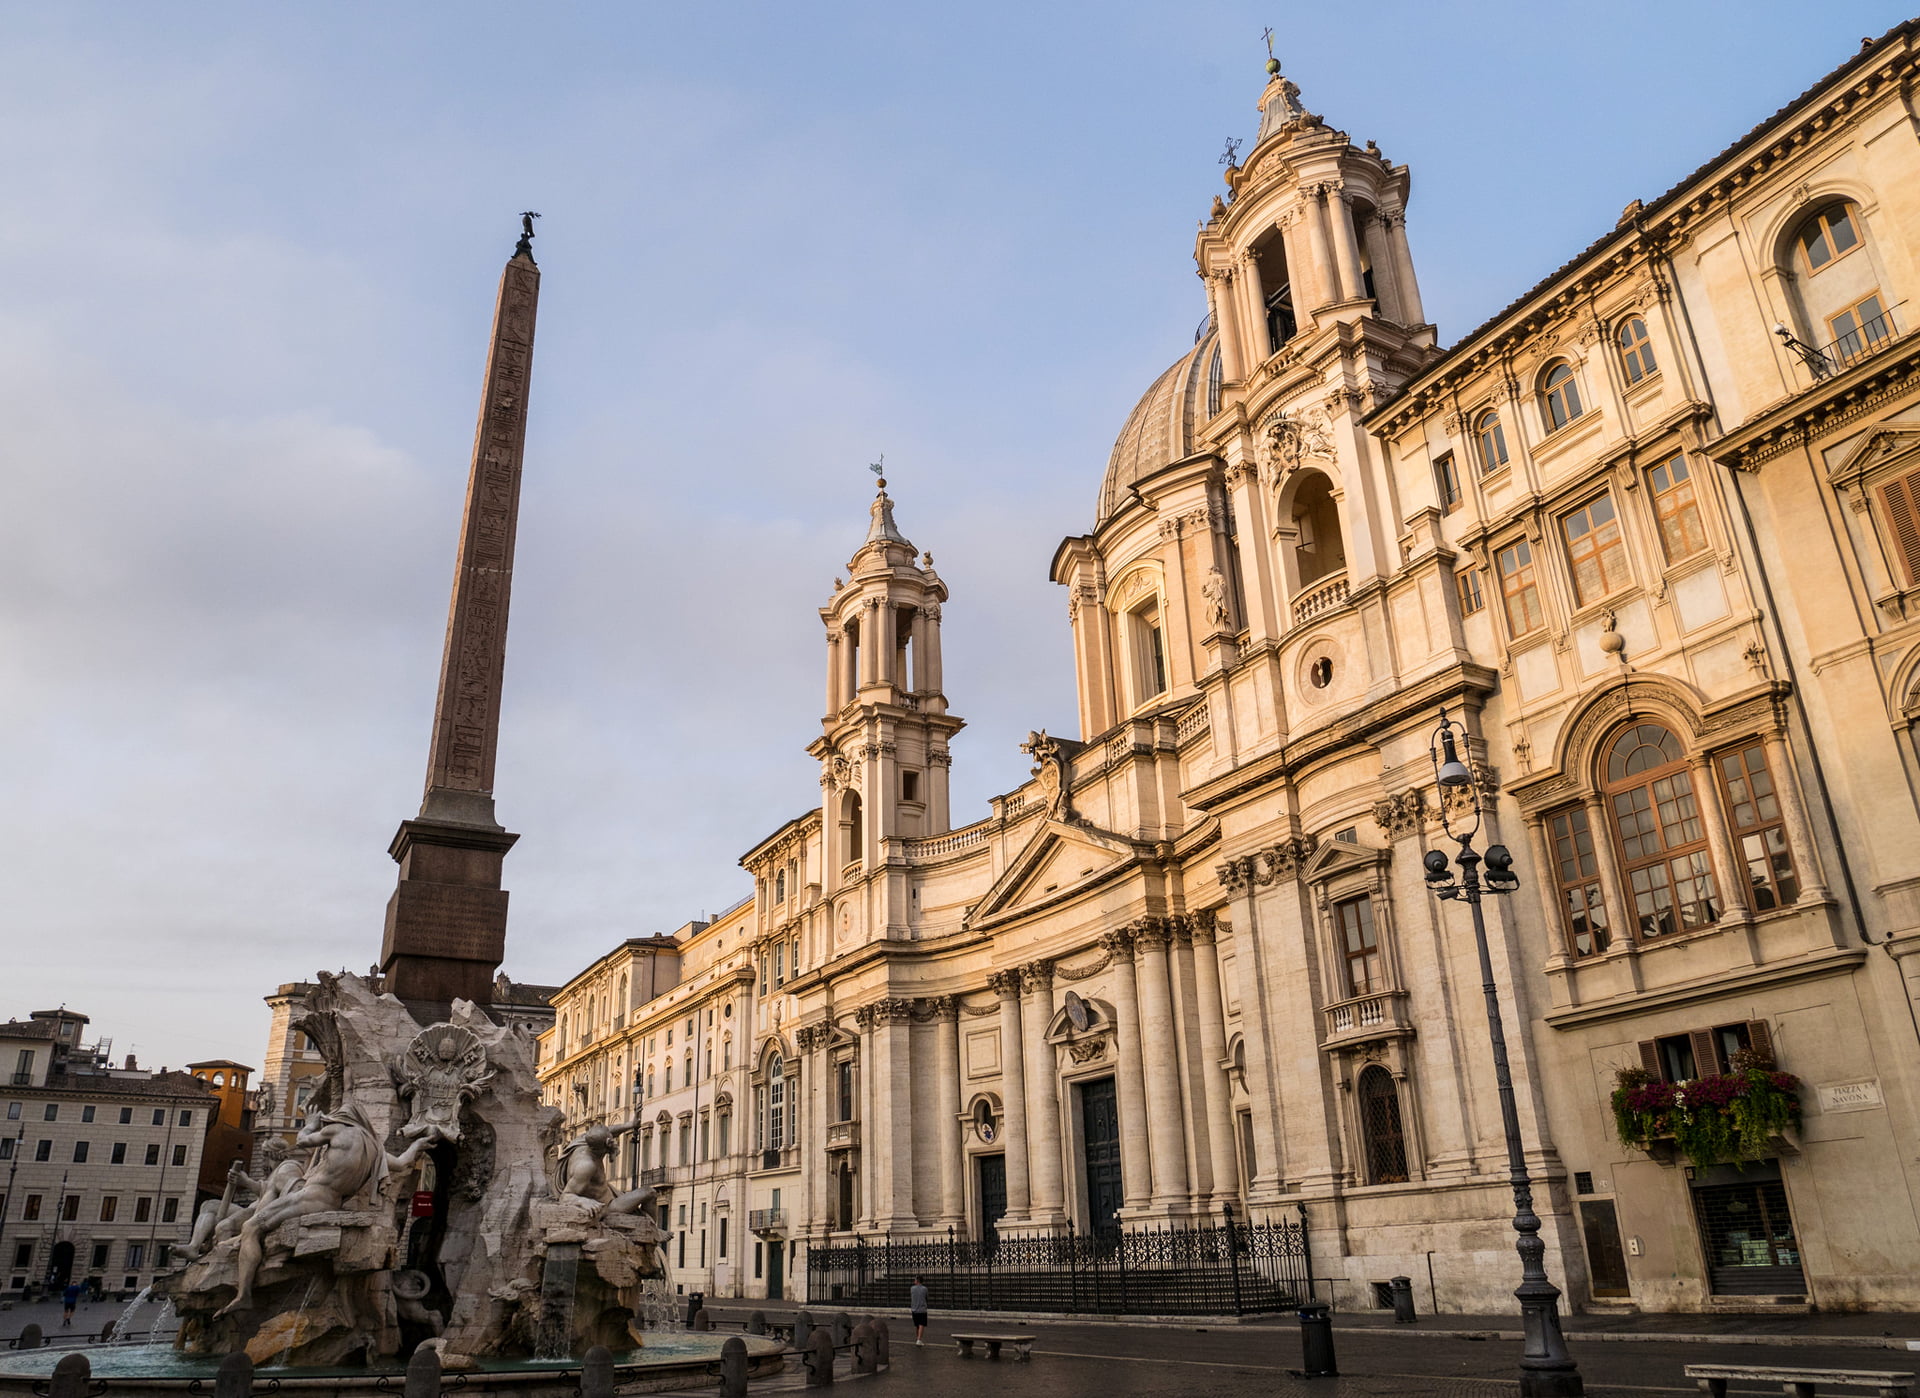 Rome, Italy, Cathedral, obelisk, Piazza Navona, fountain of the four rivers